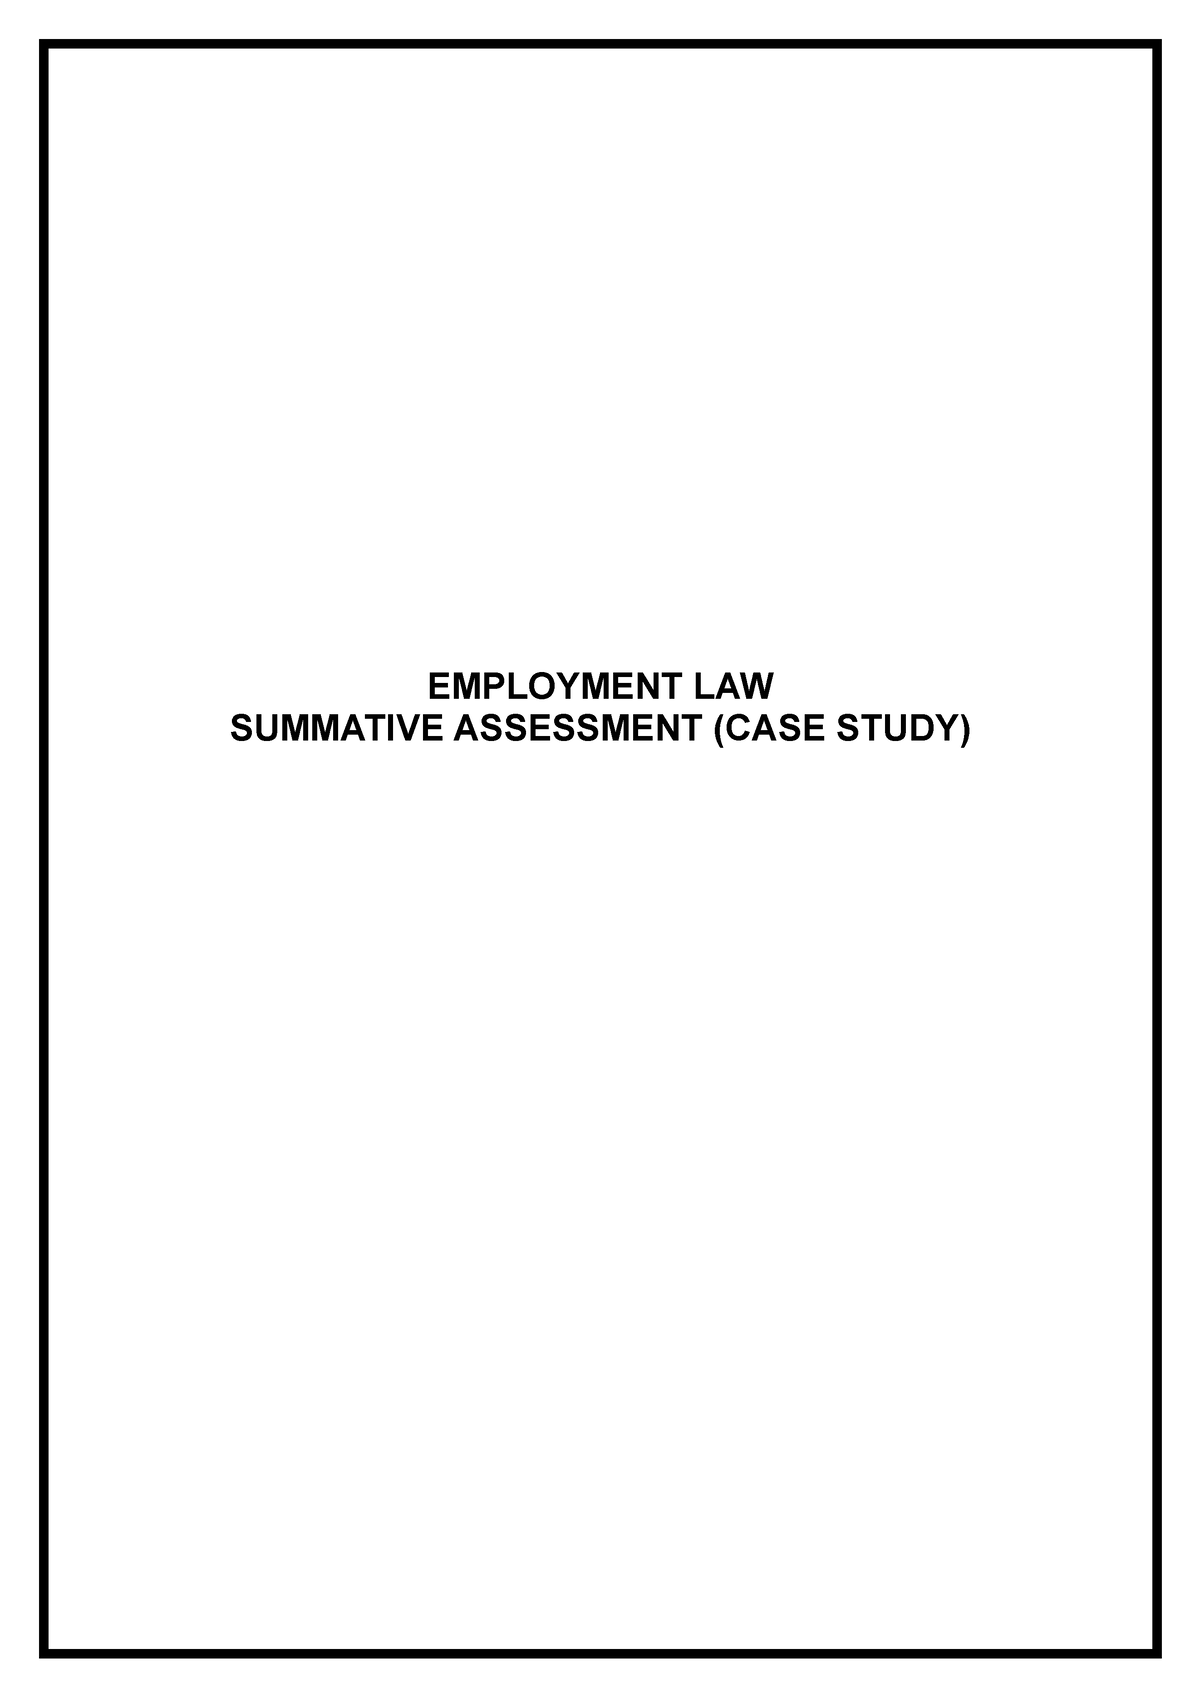 employment law case study examples